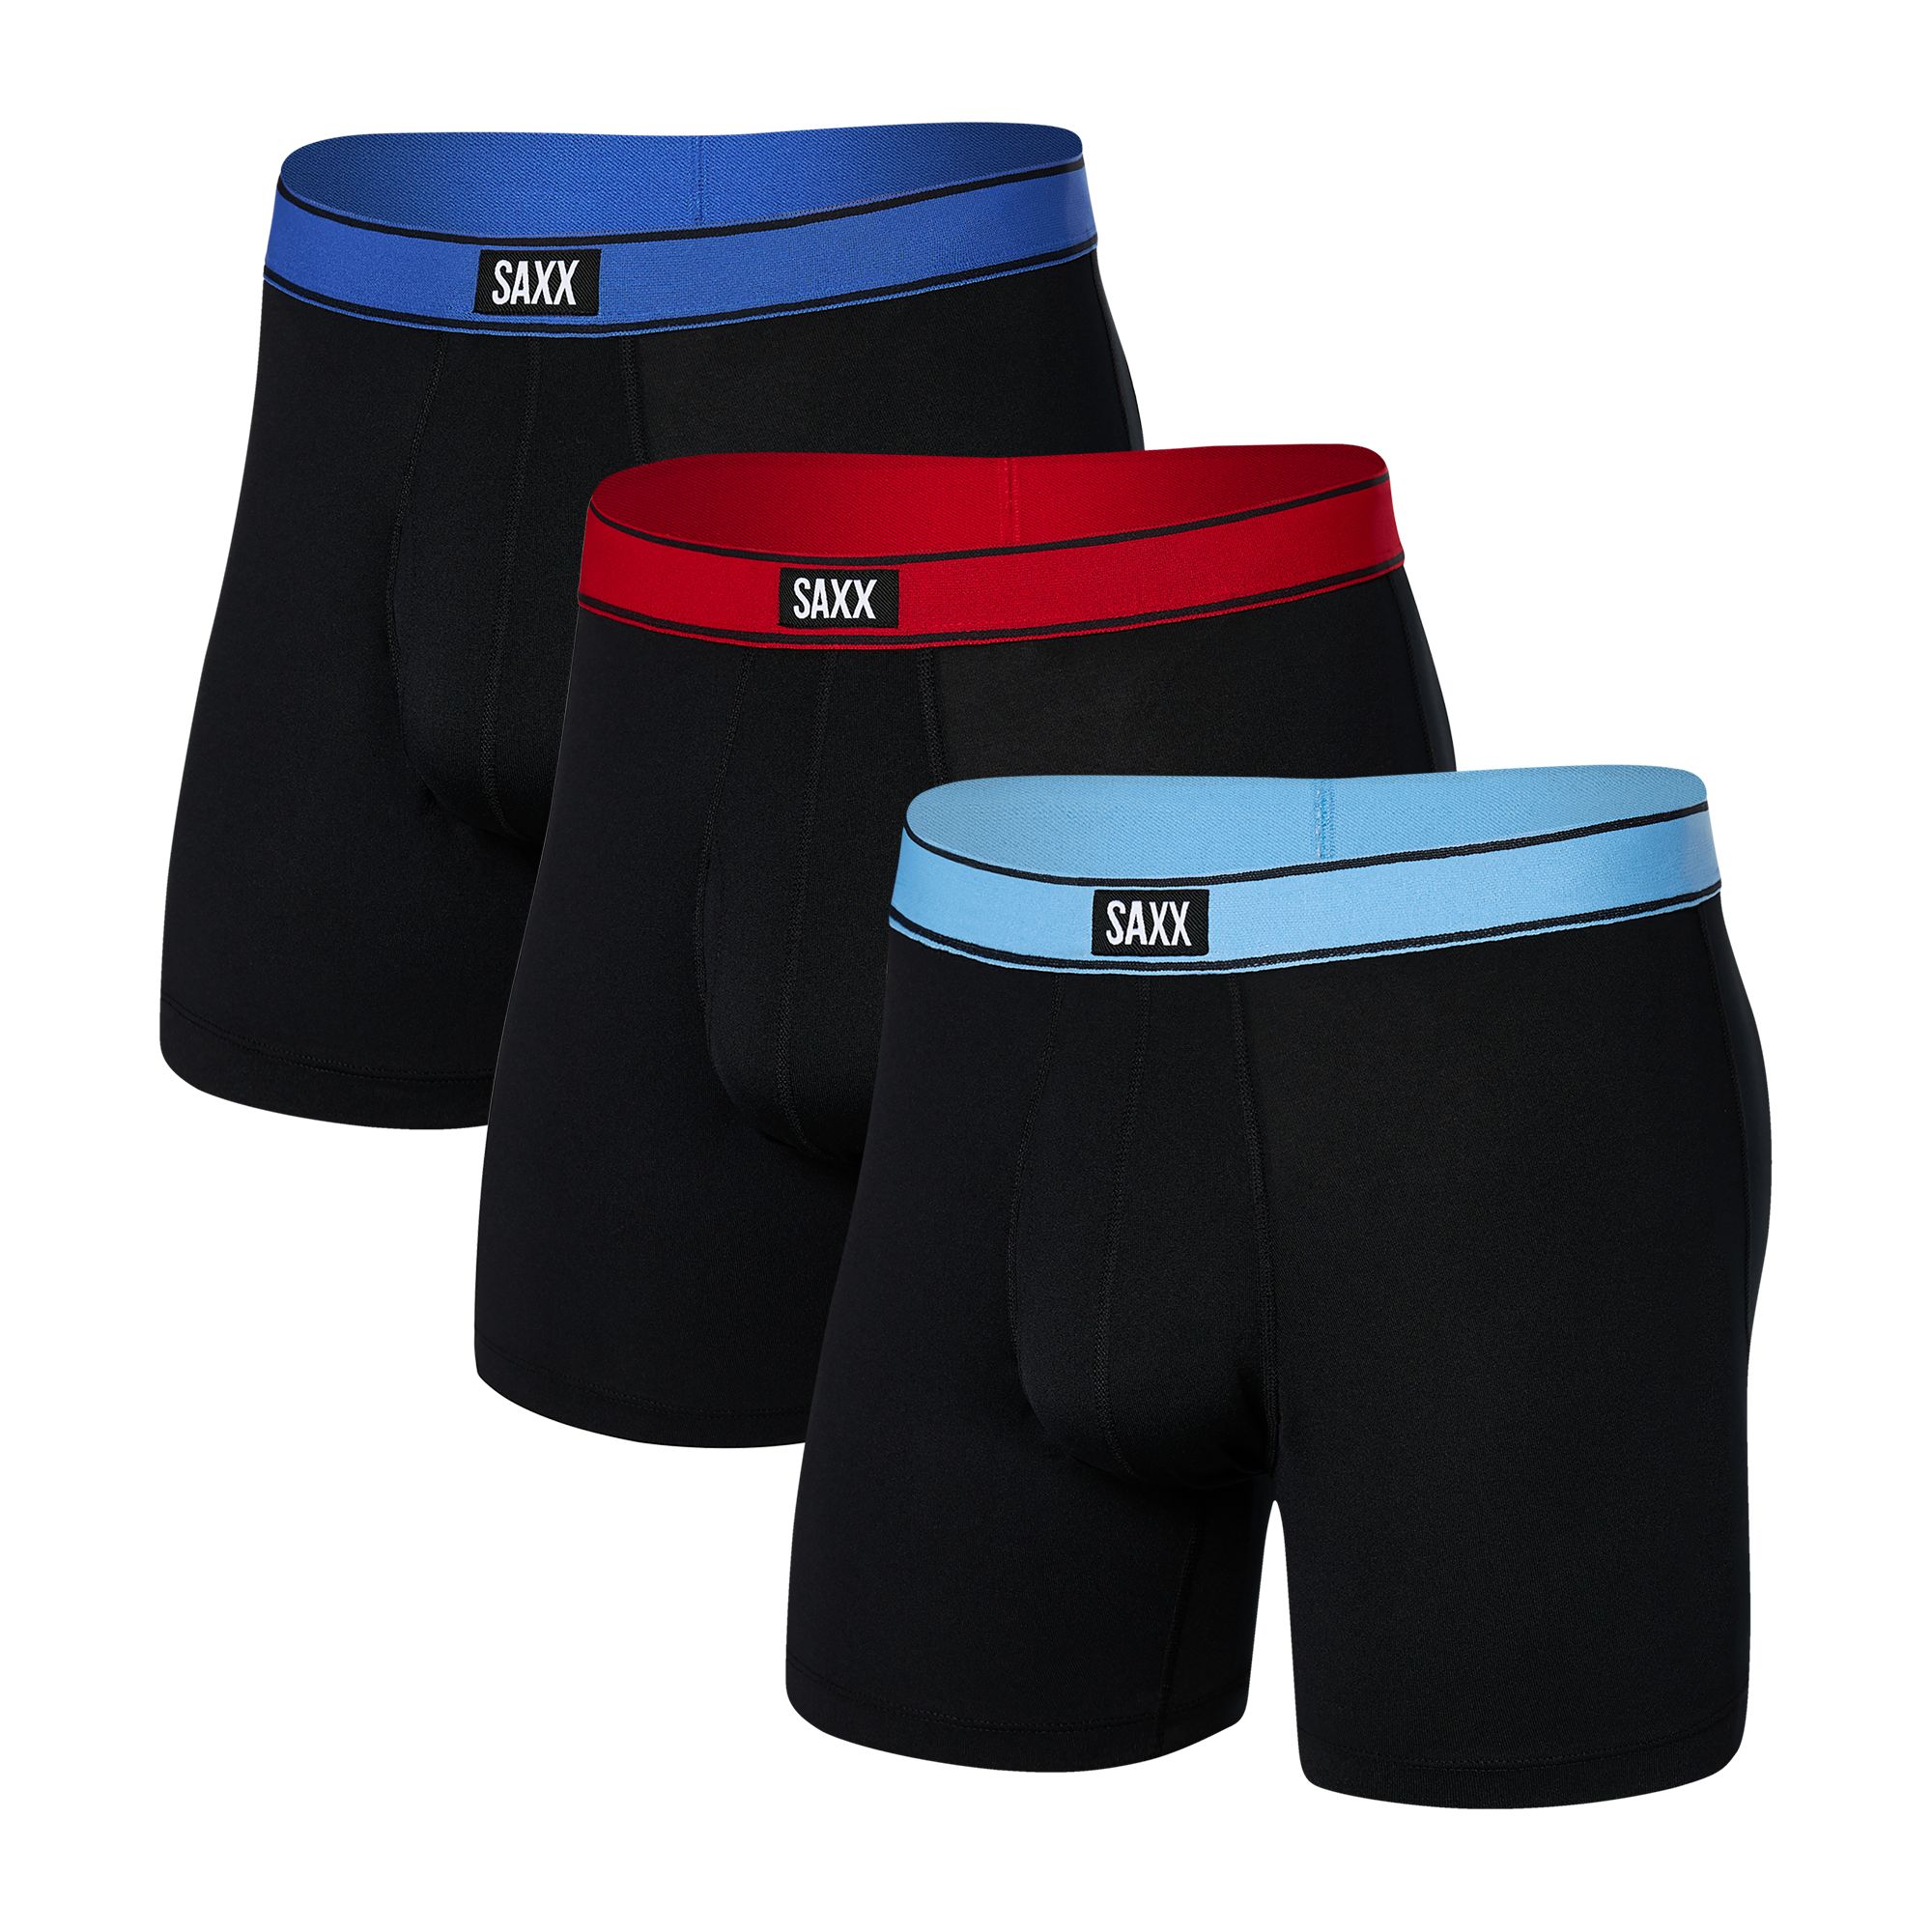 https://media-www.marks.com/product/marks-work-wearhouse/industrial-world/mens-underwear-and-loungewear/410036592132/saxx-men-s-3-pack-vibe-holiday-gift-box-13efe05b-870b-4849-9c53-8f7f254decc3-jpgrendition.jpg?imdensity=1&imwidth=1244&impolicy=mZoom